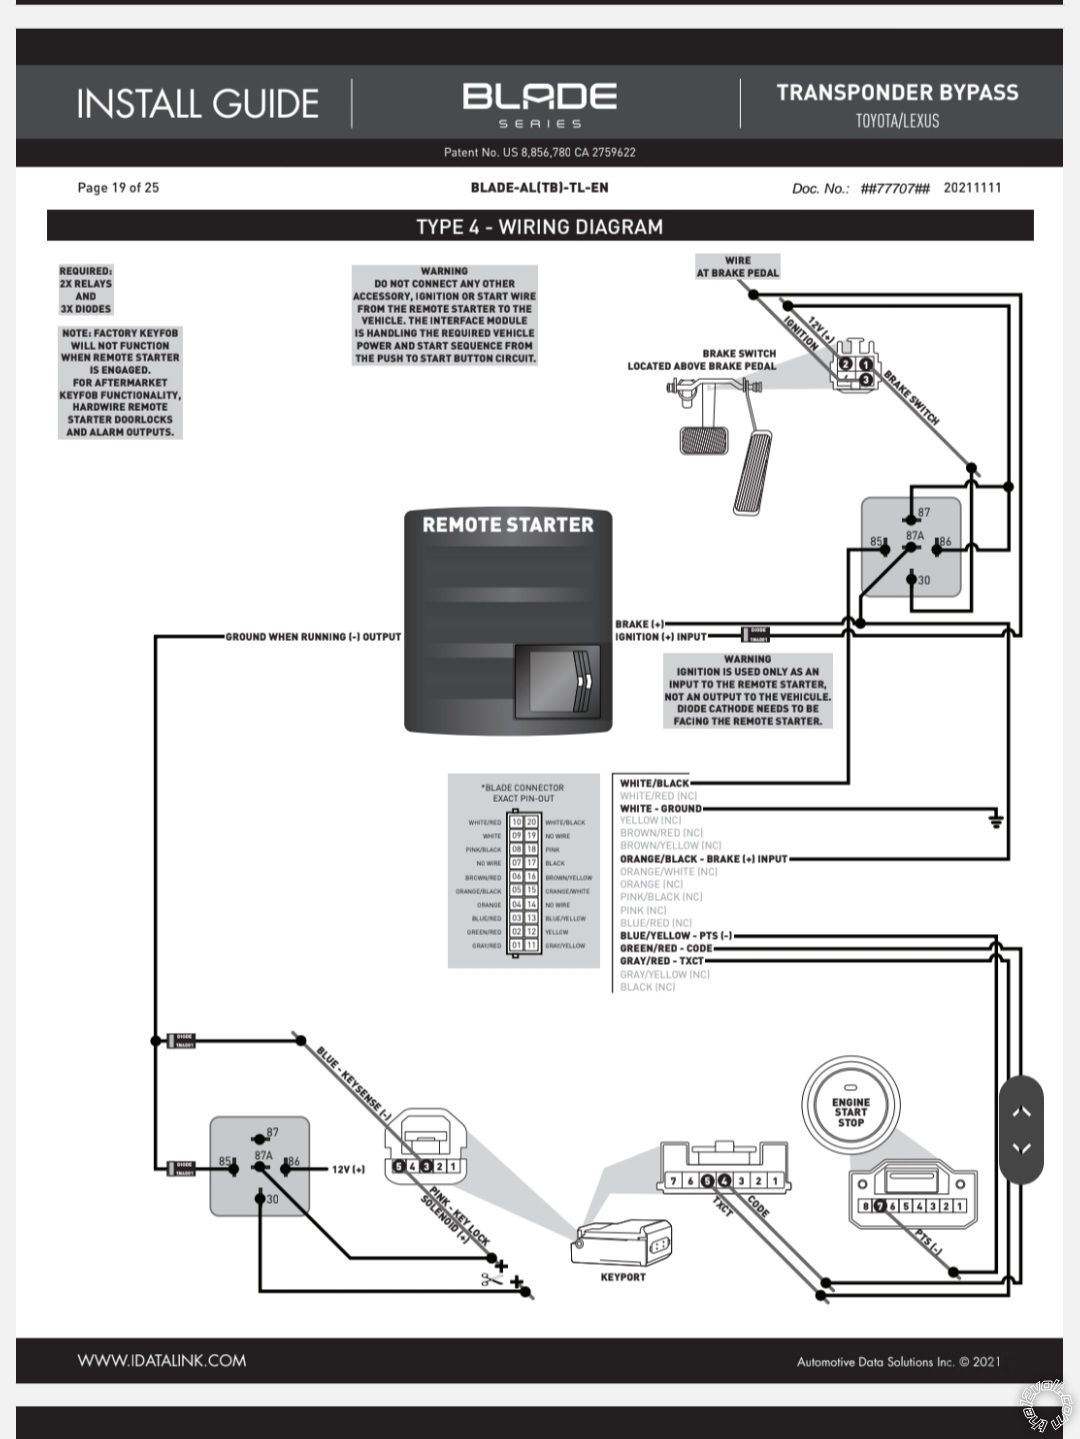 Remote Start Wiring, 2008 Toyota Prius - Page 4 - Last Post -- posted image.